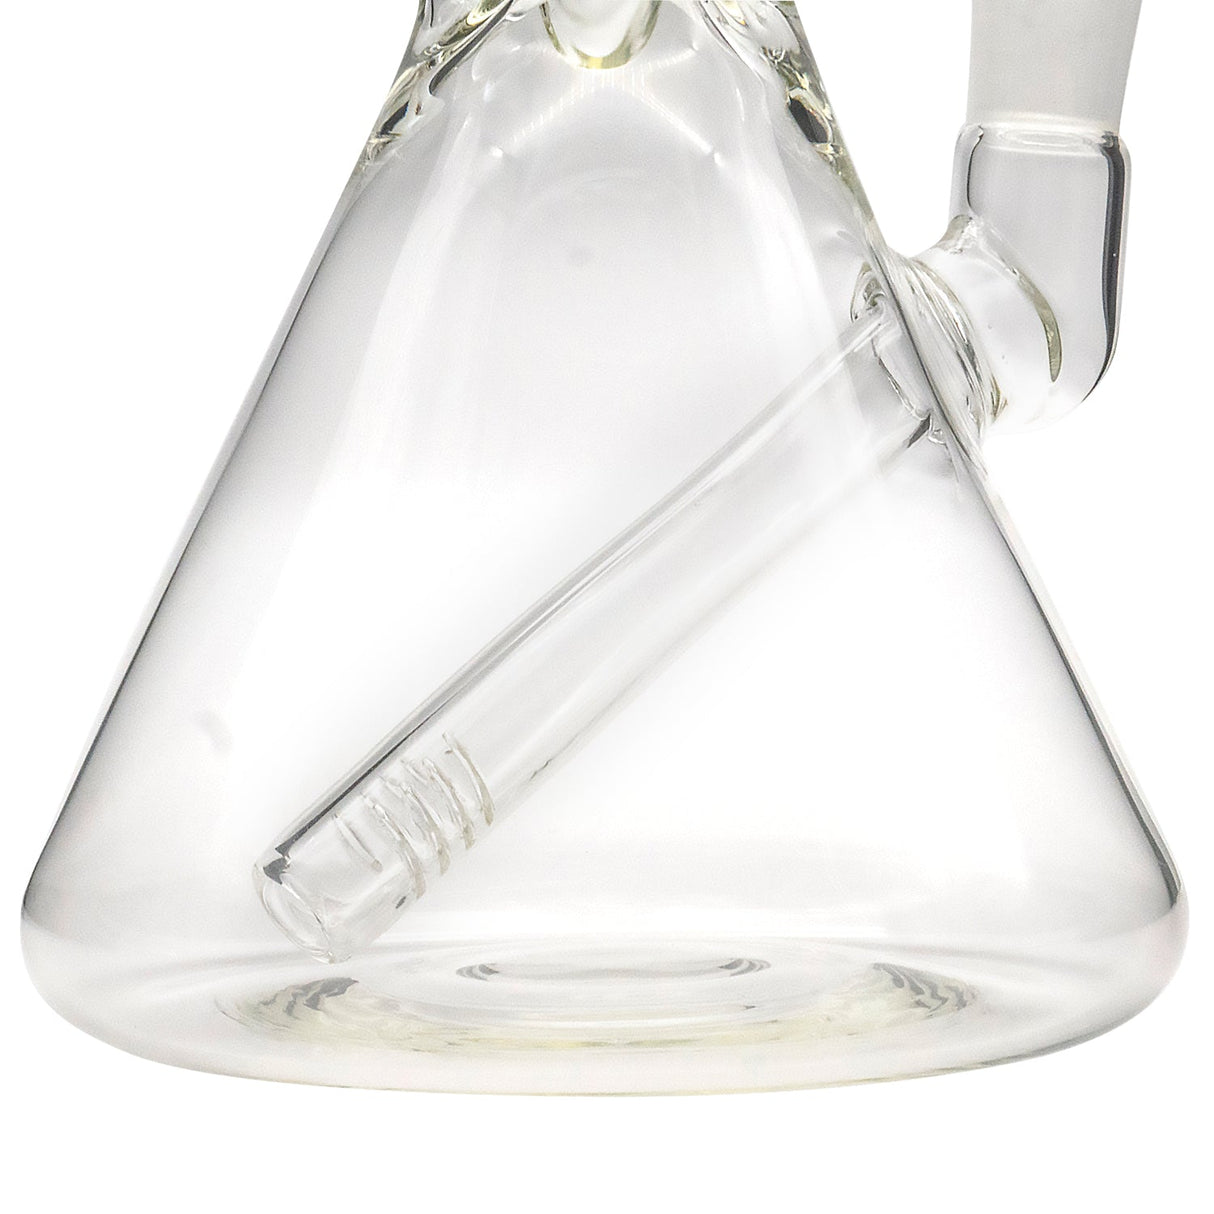 Close-up of LA Pipes Classic Beaker Concentrate Rig base with banger hanger design